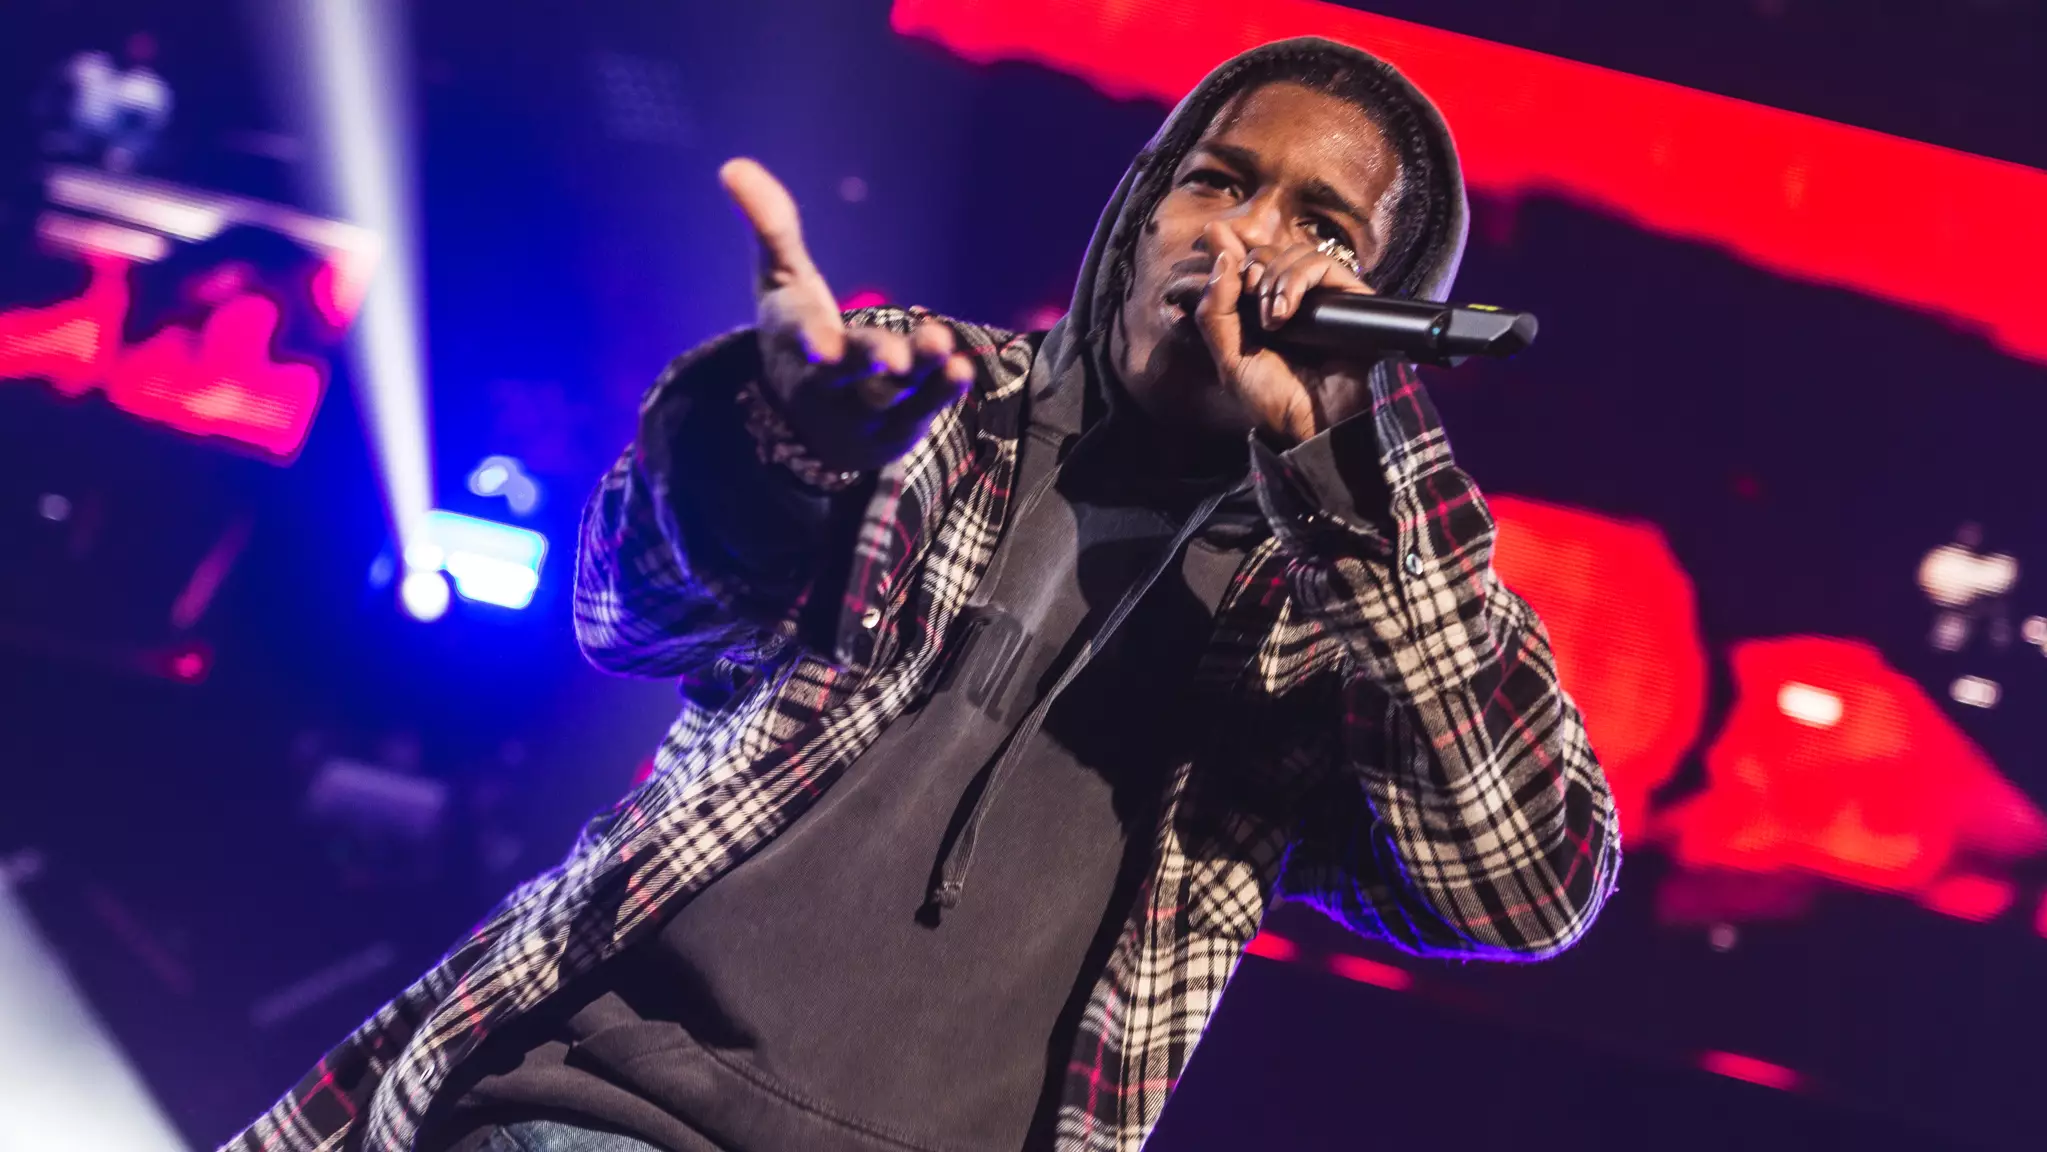 ​Who Is A$AP Rocky? Rapper Faces Assault Charges In Sweden